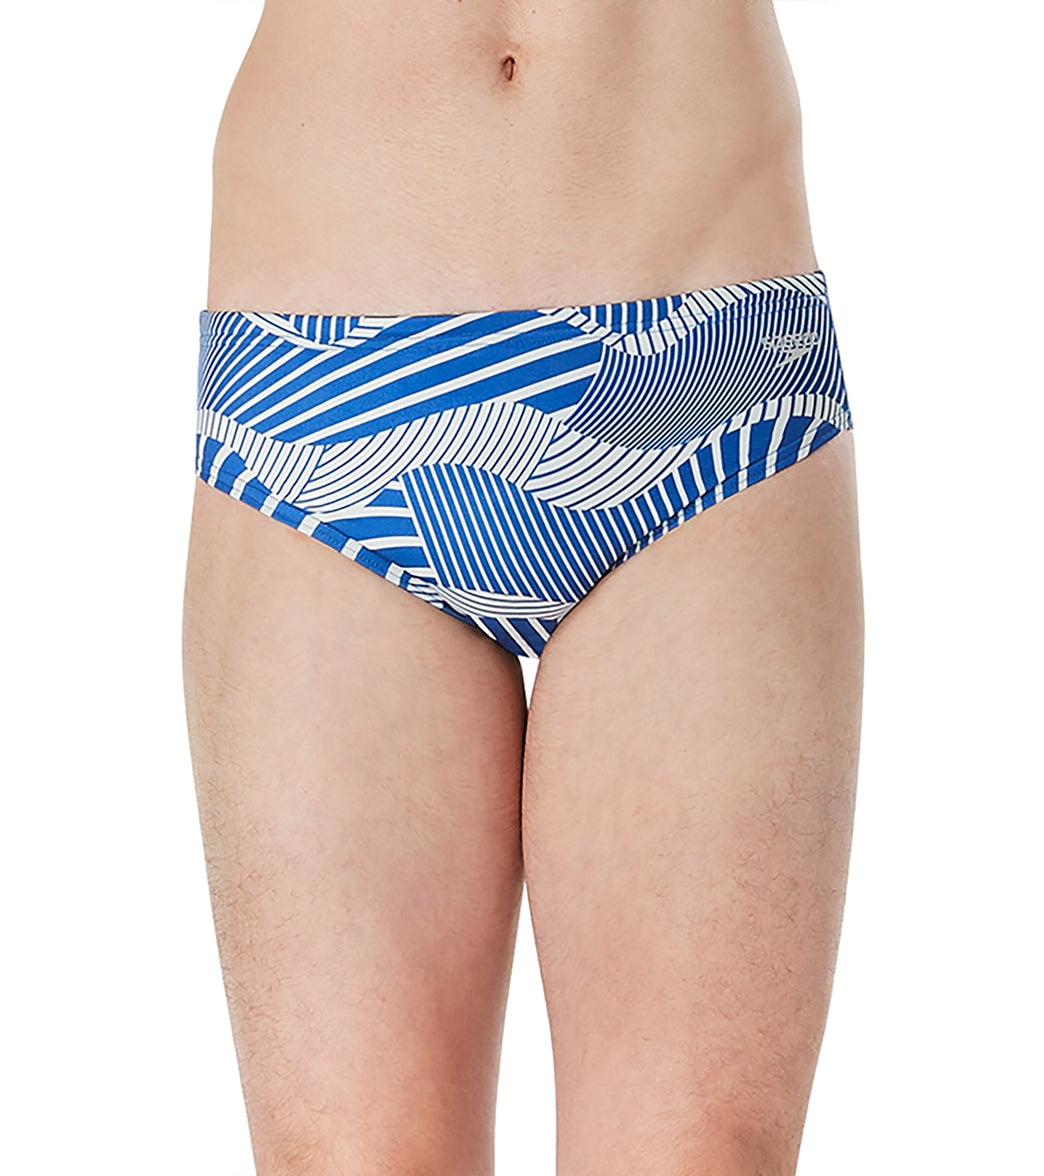 Speedo Vibe Mens Printed One Brief Swimsuit at SwimOutlet